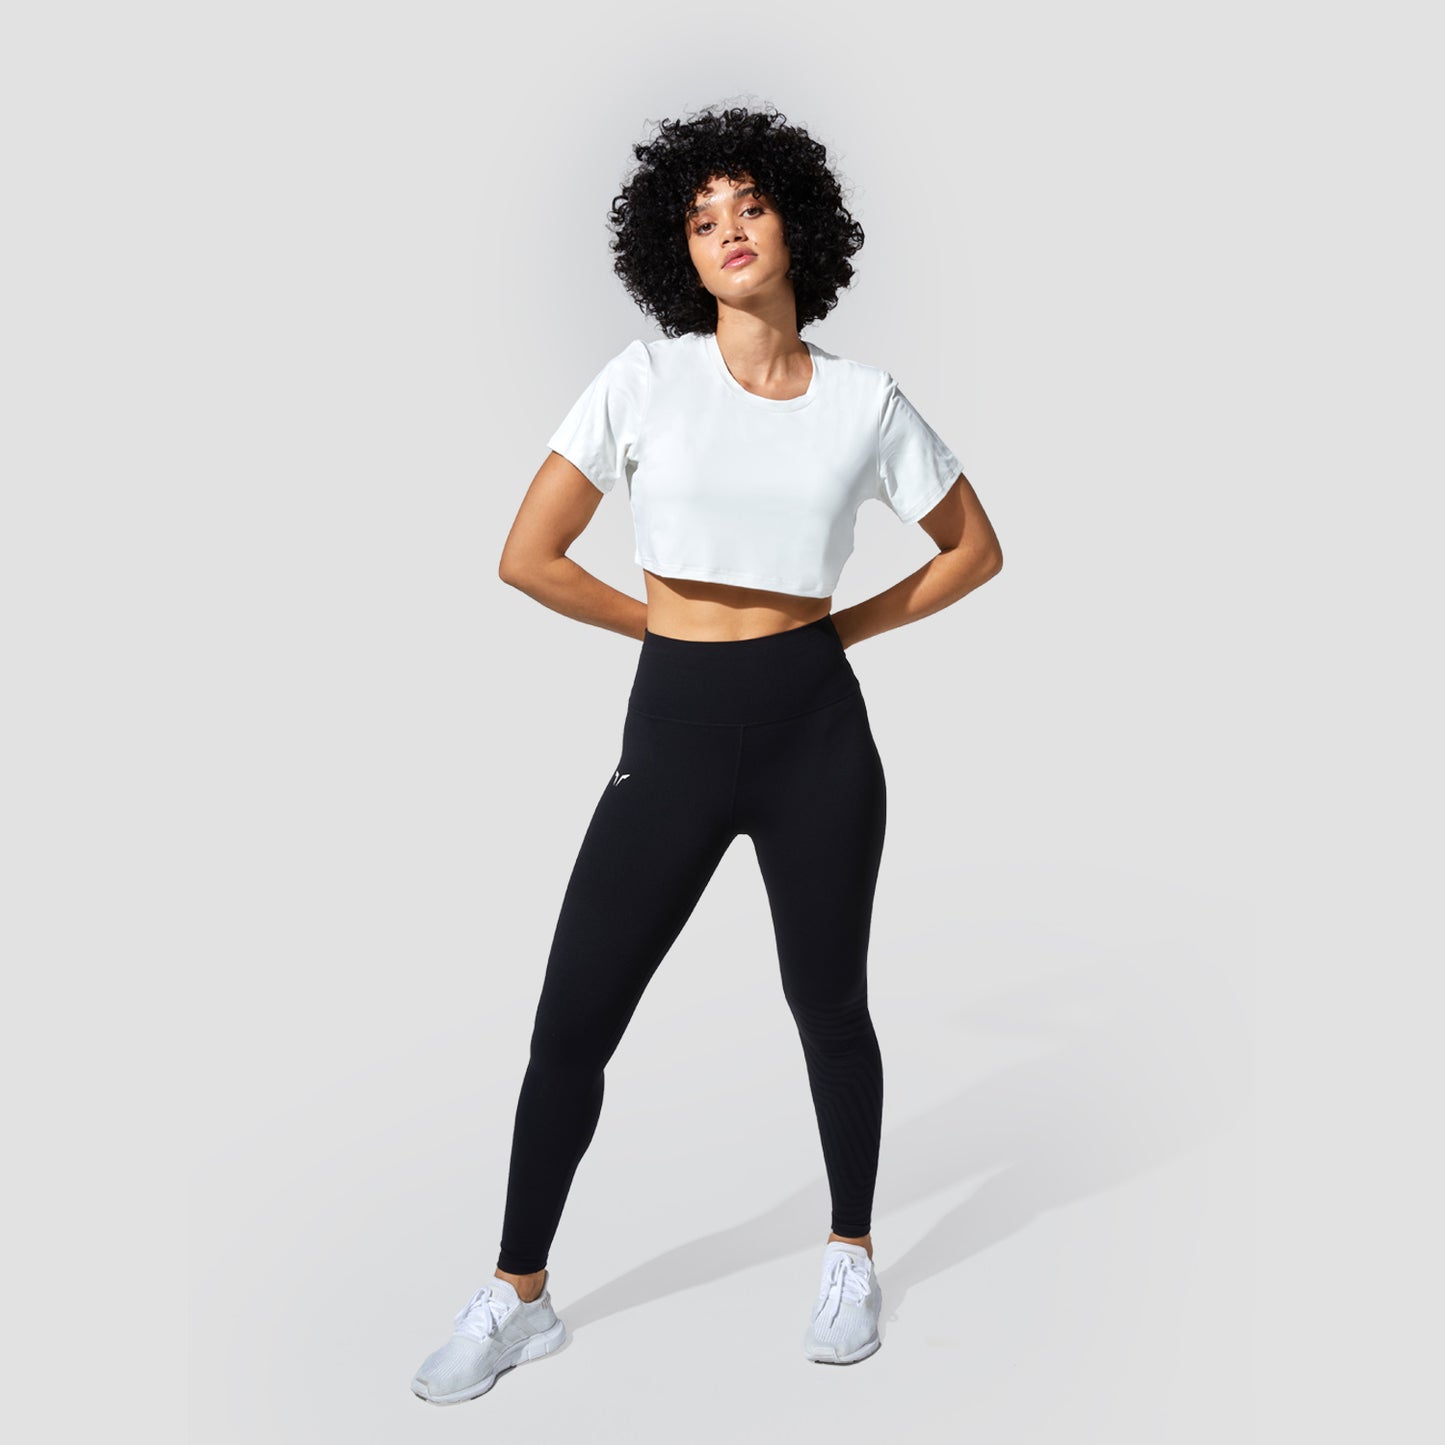 squatwolf-gym-wear-graphic-wave-eyes-crop-top-white-workout-shirts